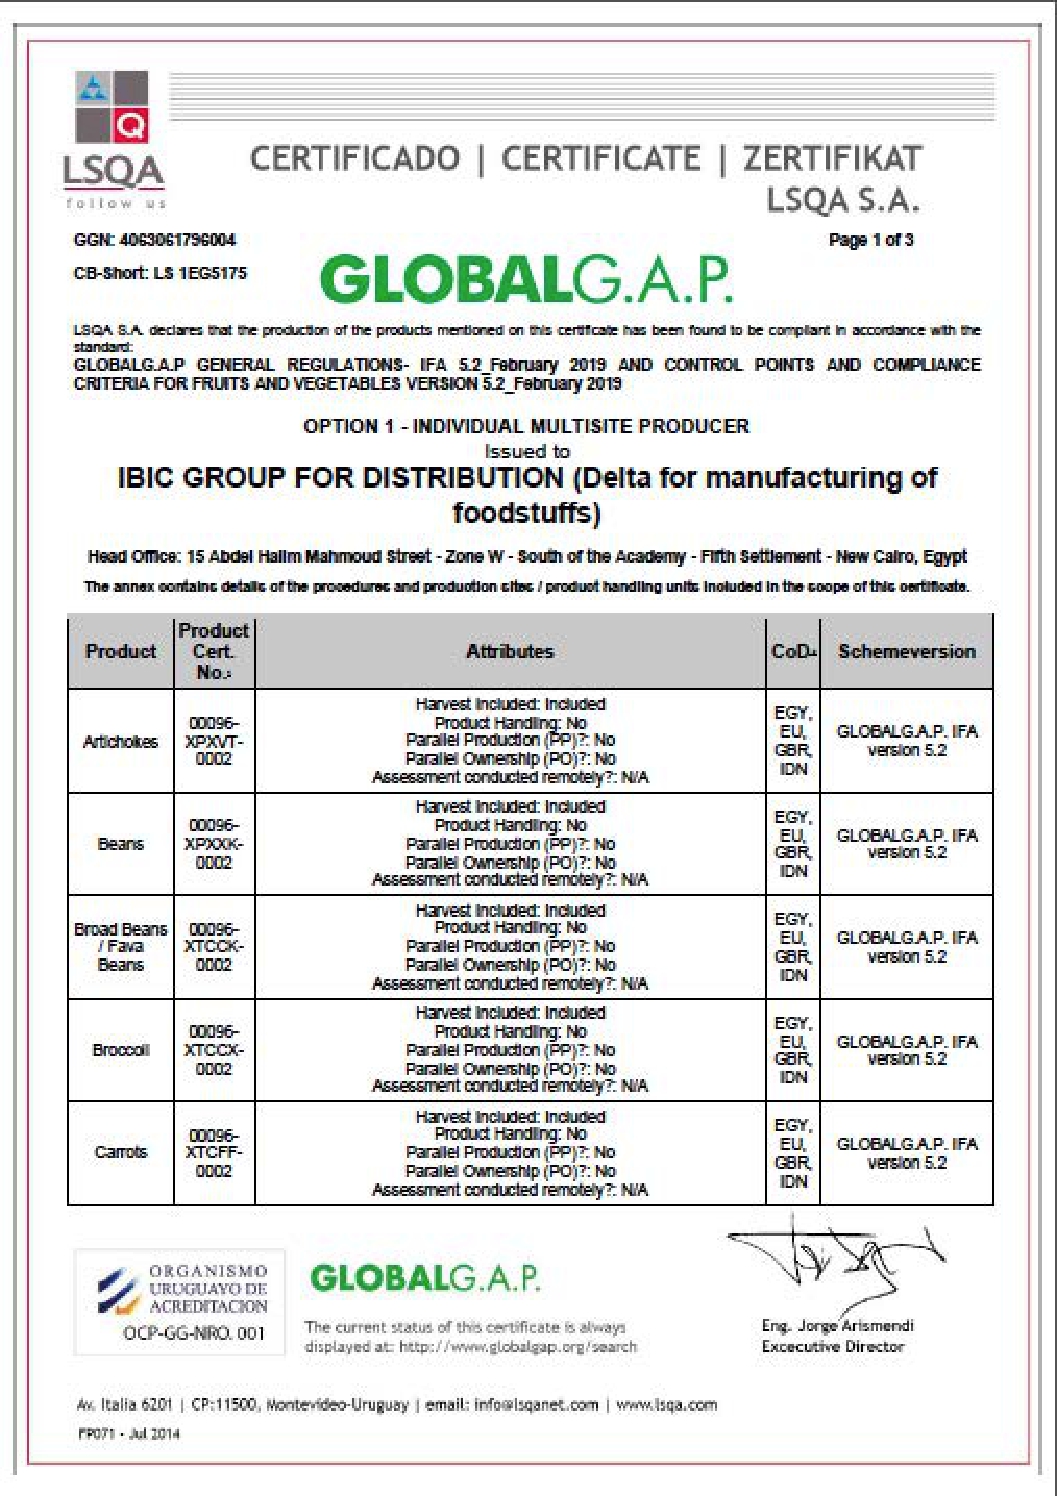 GLOBAL G.A.P certification